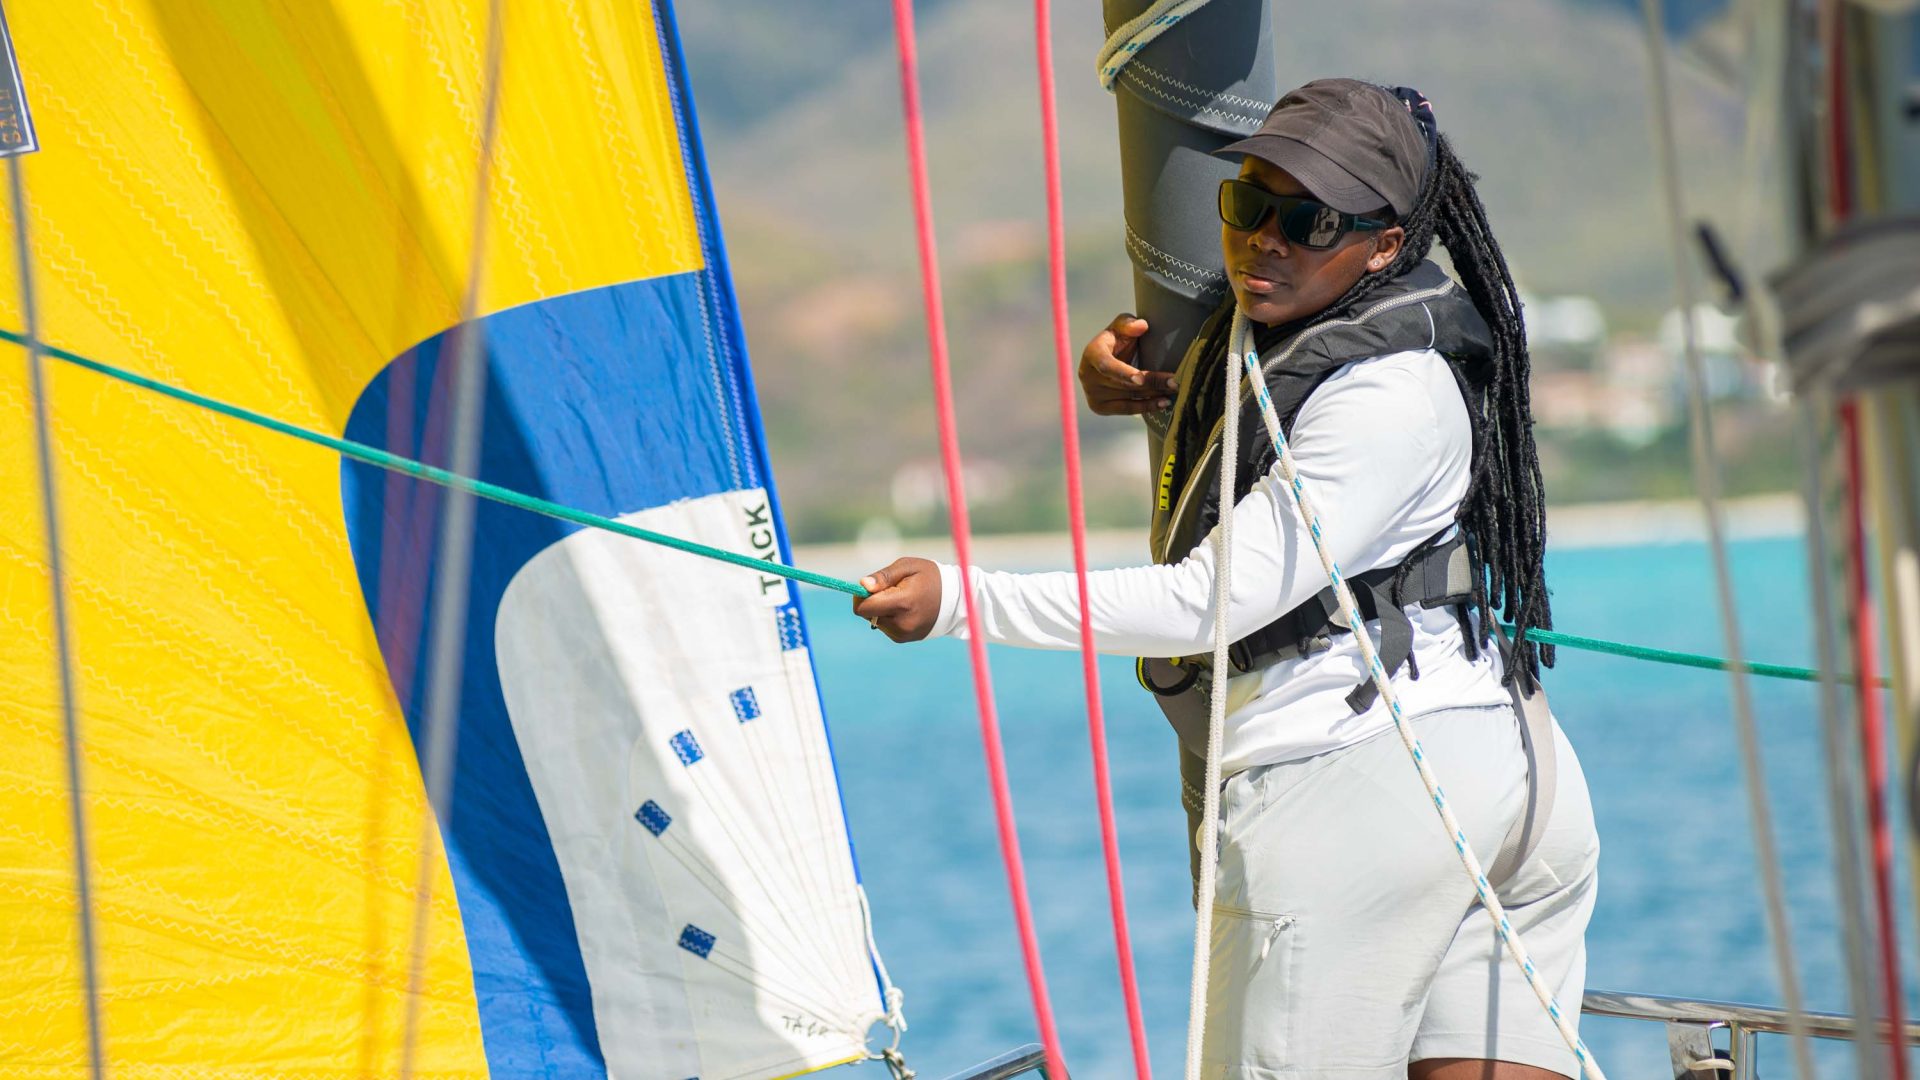 A woman stands and manages a sail which is yellow, white and blue.